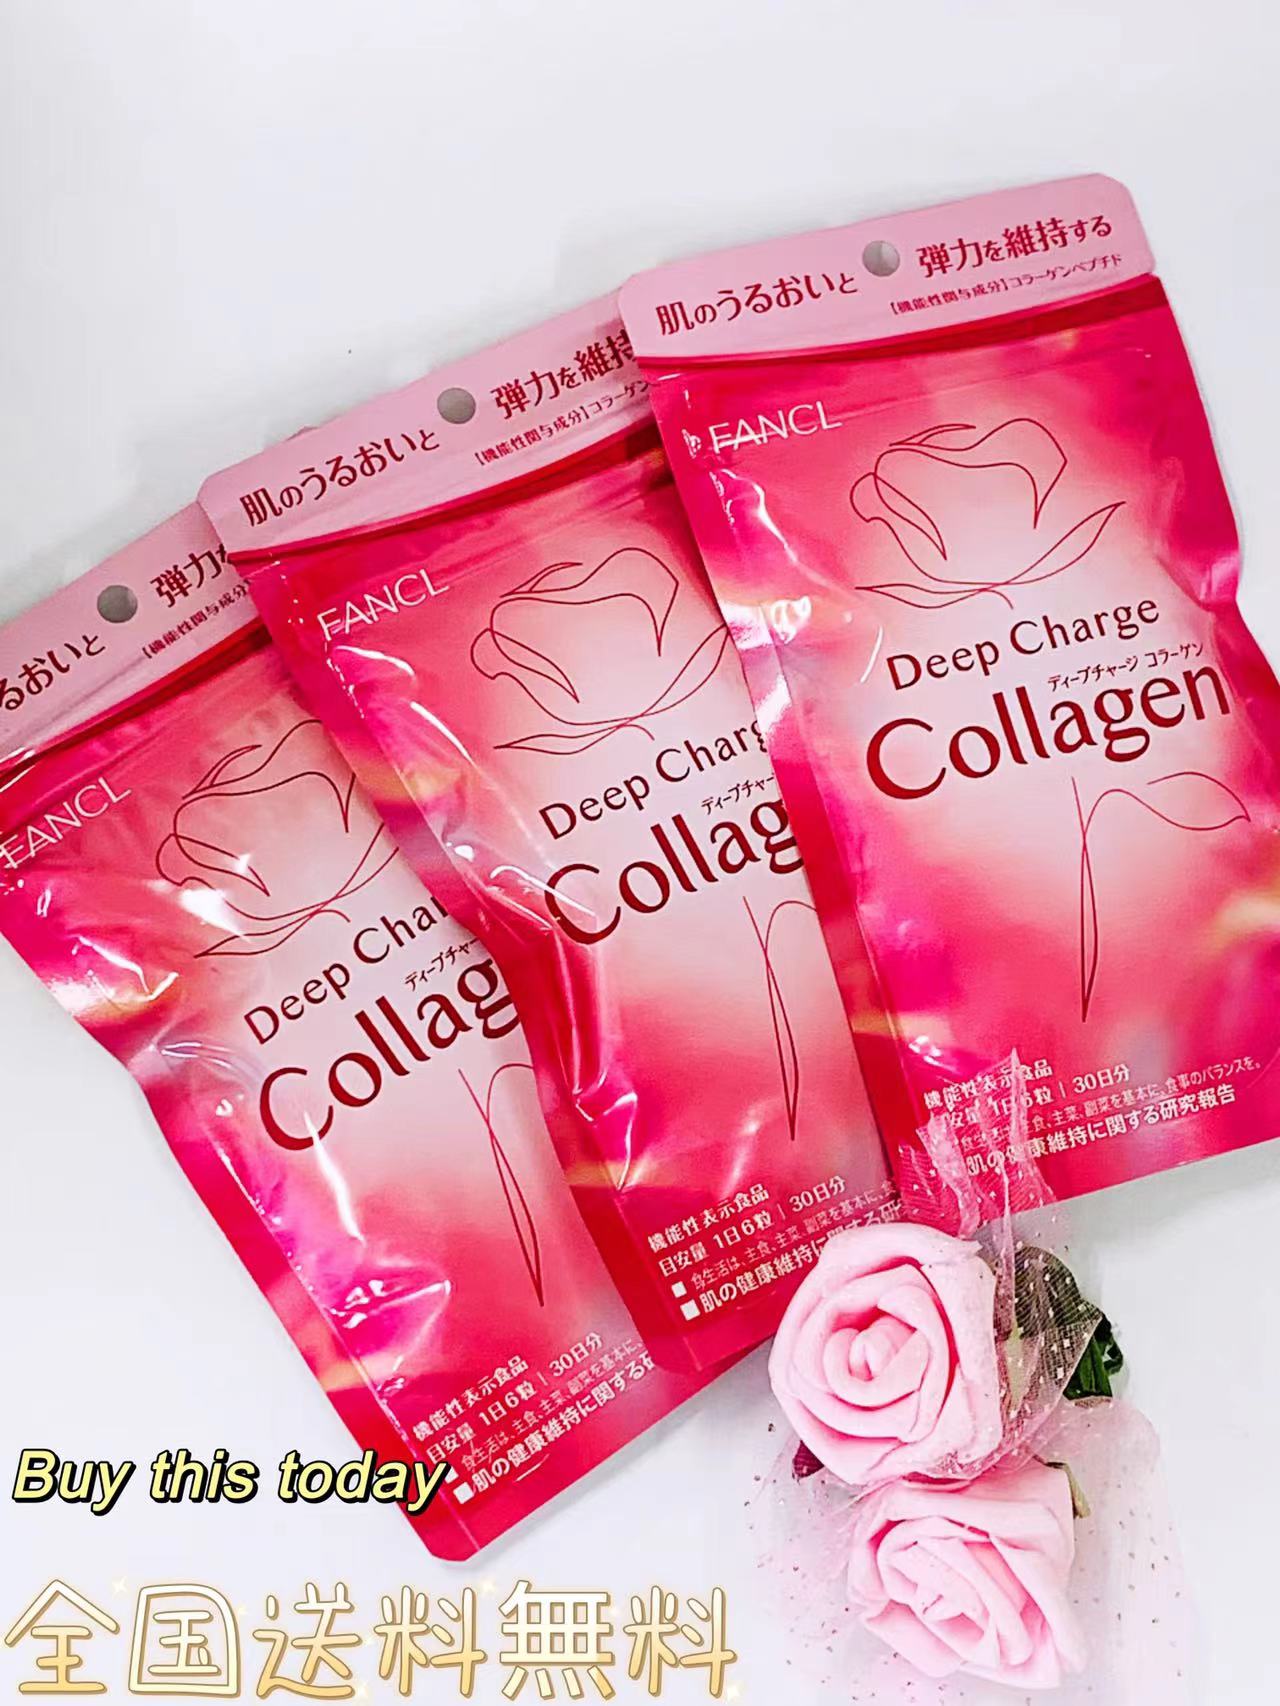 FANCL deep Charge collagen 90 day minute supplement beauty woman beauty Fancl nationwide free shipping * cat pohs shipping * post mailing best-before date 2025.12 on and after 